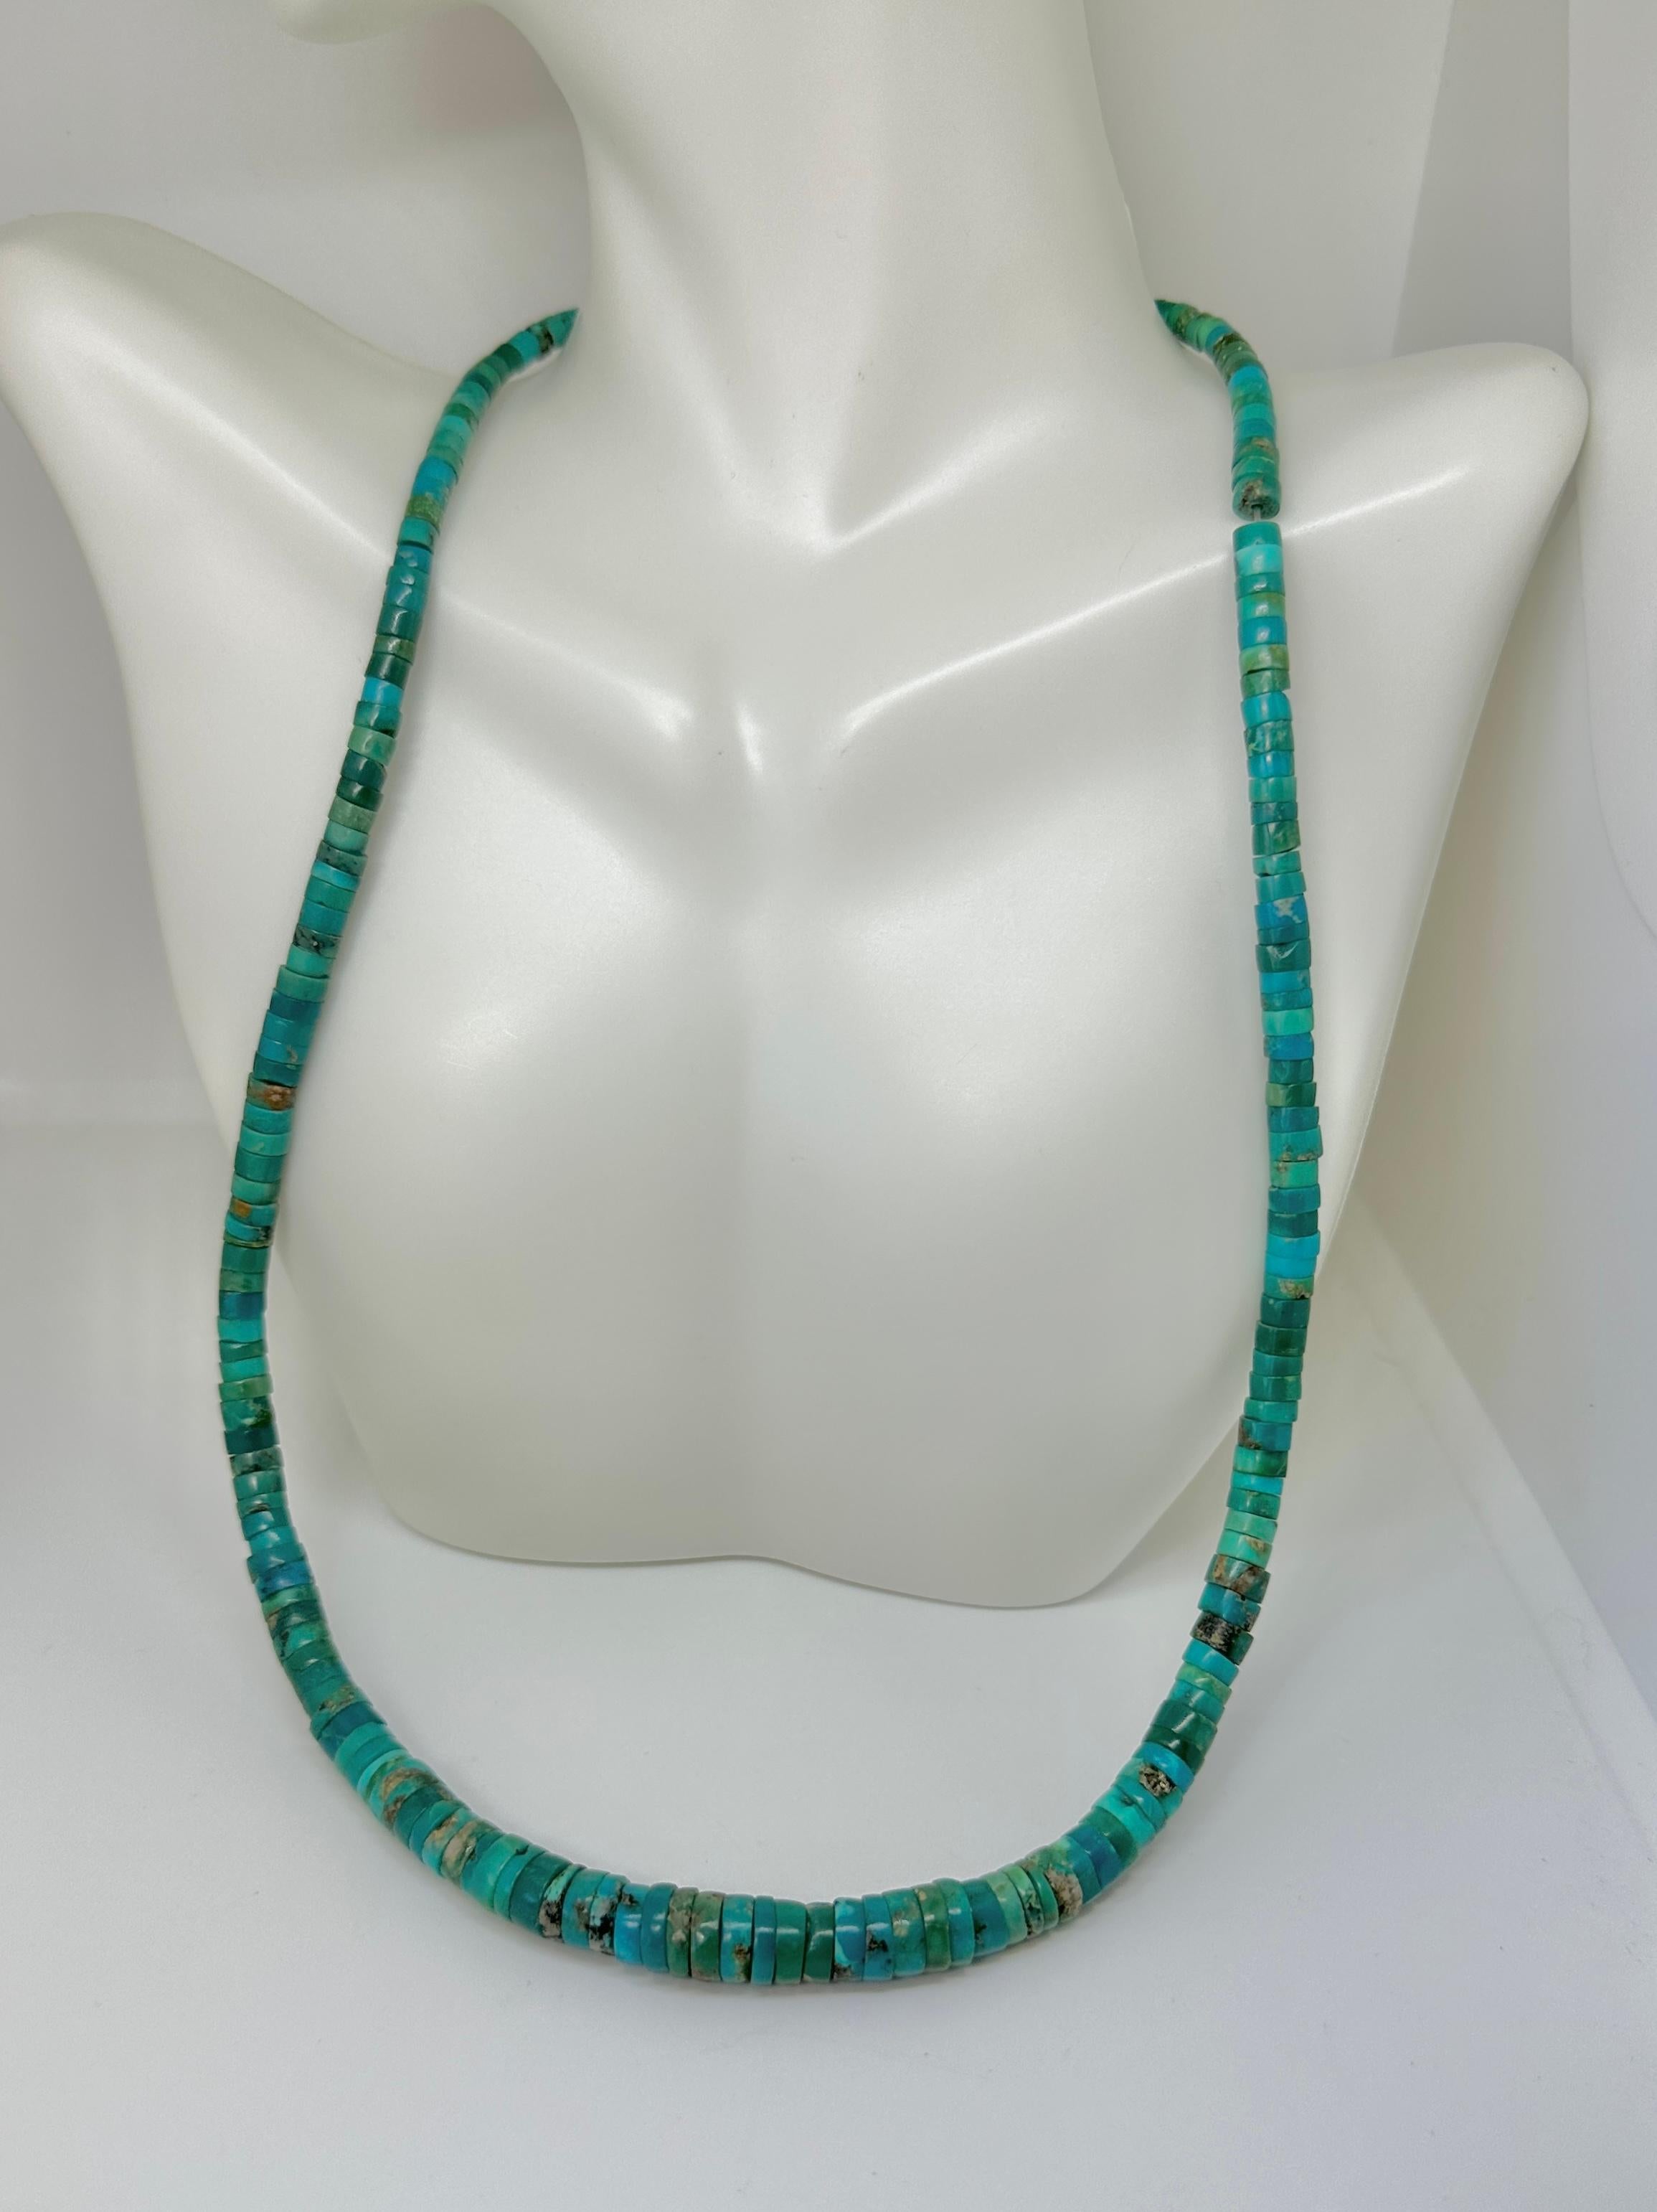 Bead Early Santo Domingo Pueblo Greasy Caribbean Blue Green Heishi Turquoise Necklace For Sale